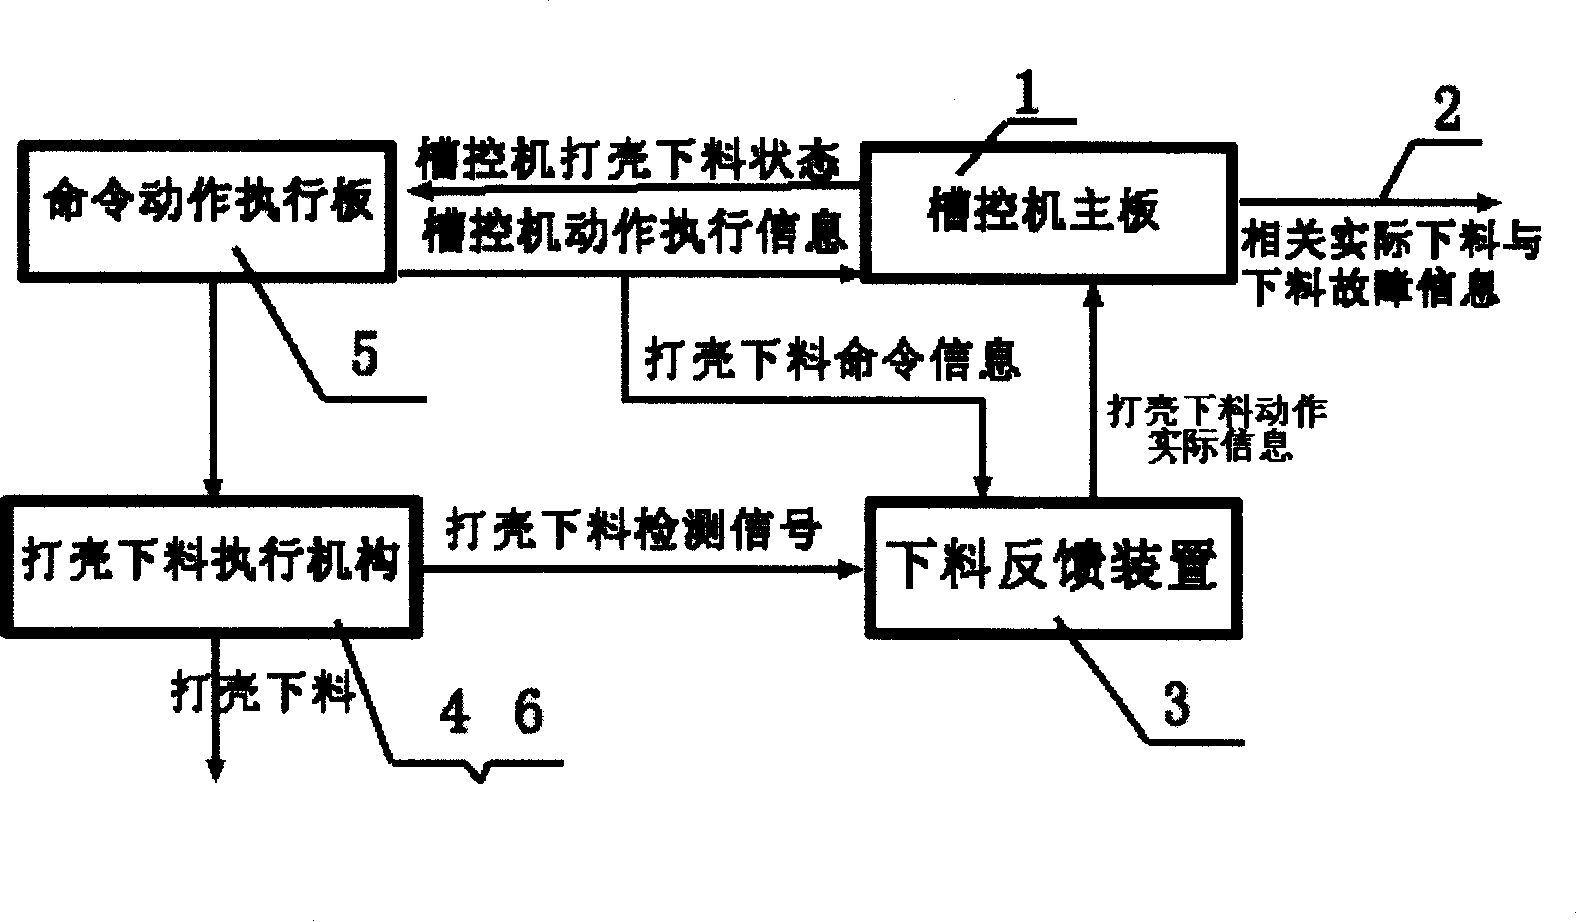 Accurate aluminum cell baiting feedback information control method